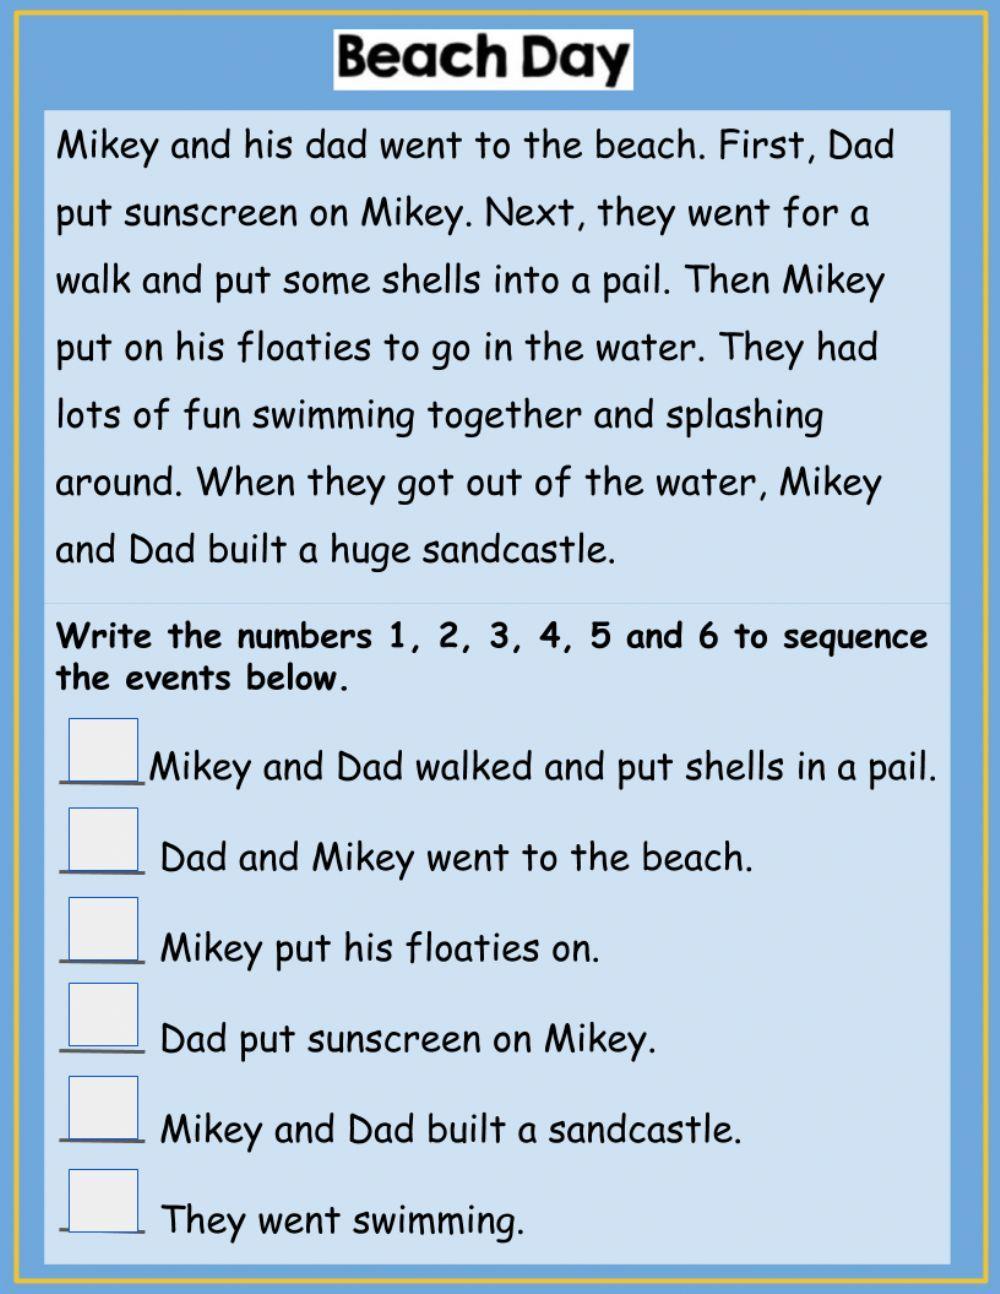 Story Sequencing Activity 2